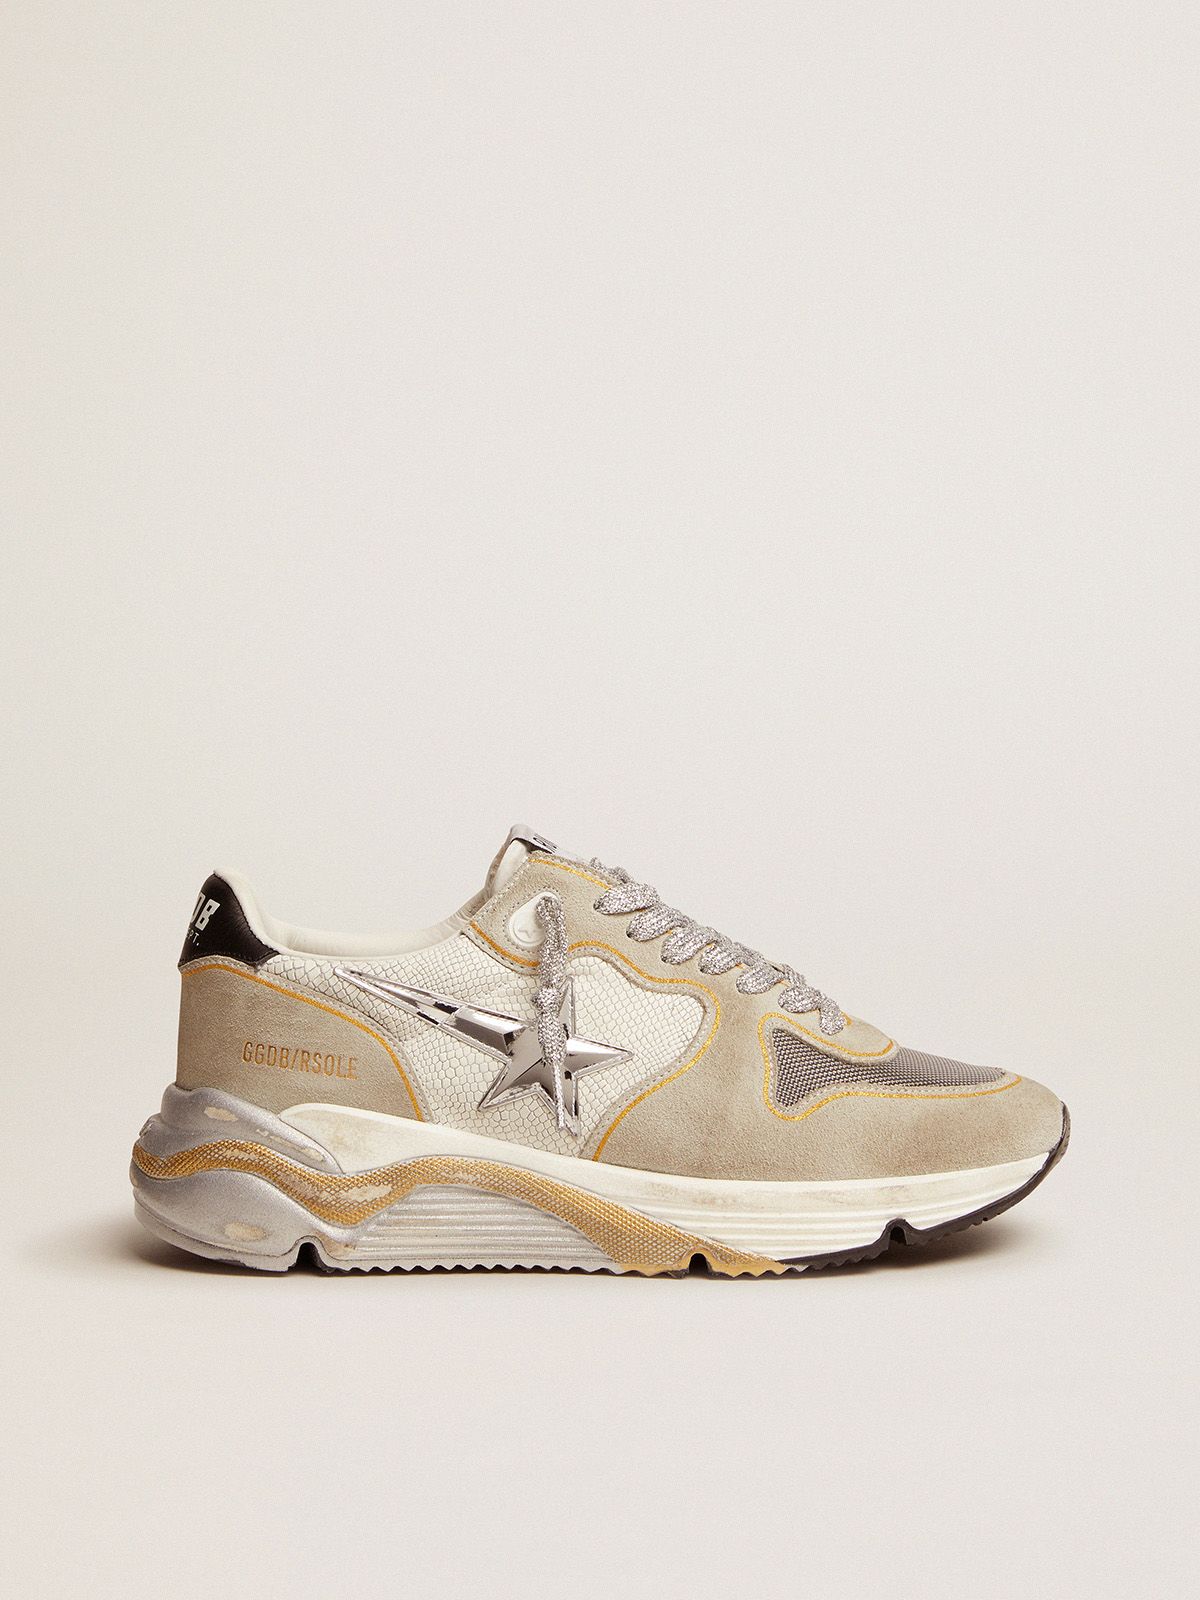 golden goose leather Running snake-print LTD suede insert and in white with sneakers Sole mesh